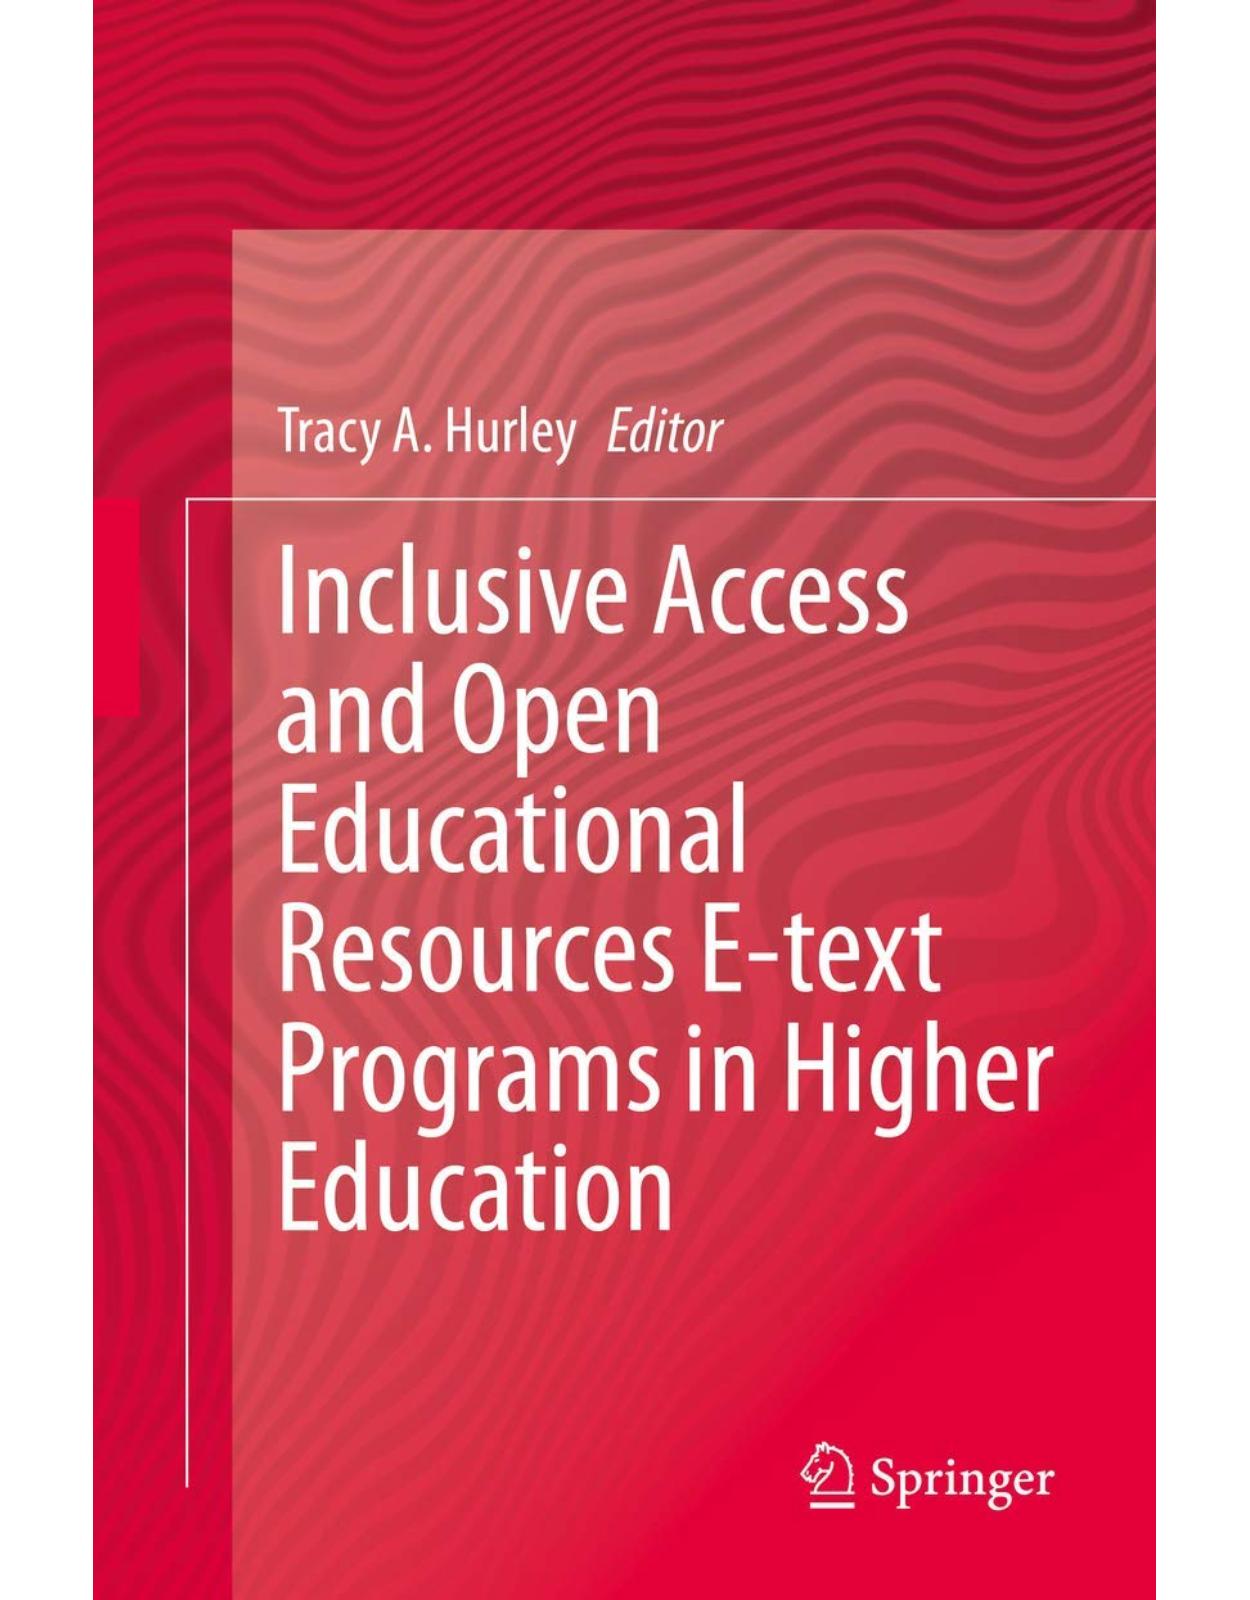 Inclusive Access and Open Educational Resources E-text Programs in Higher Education